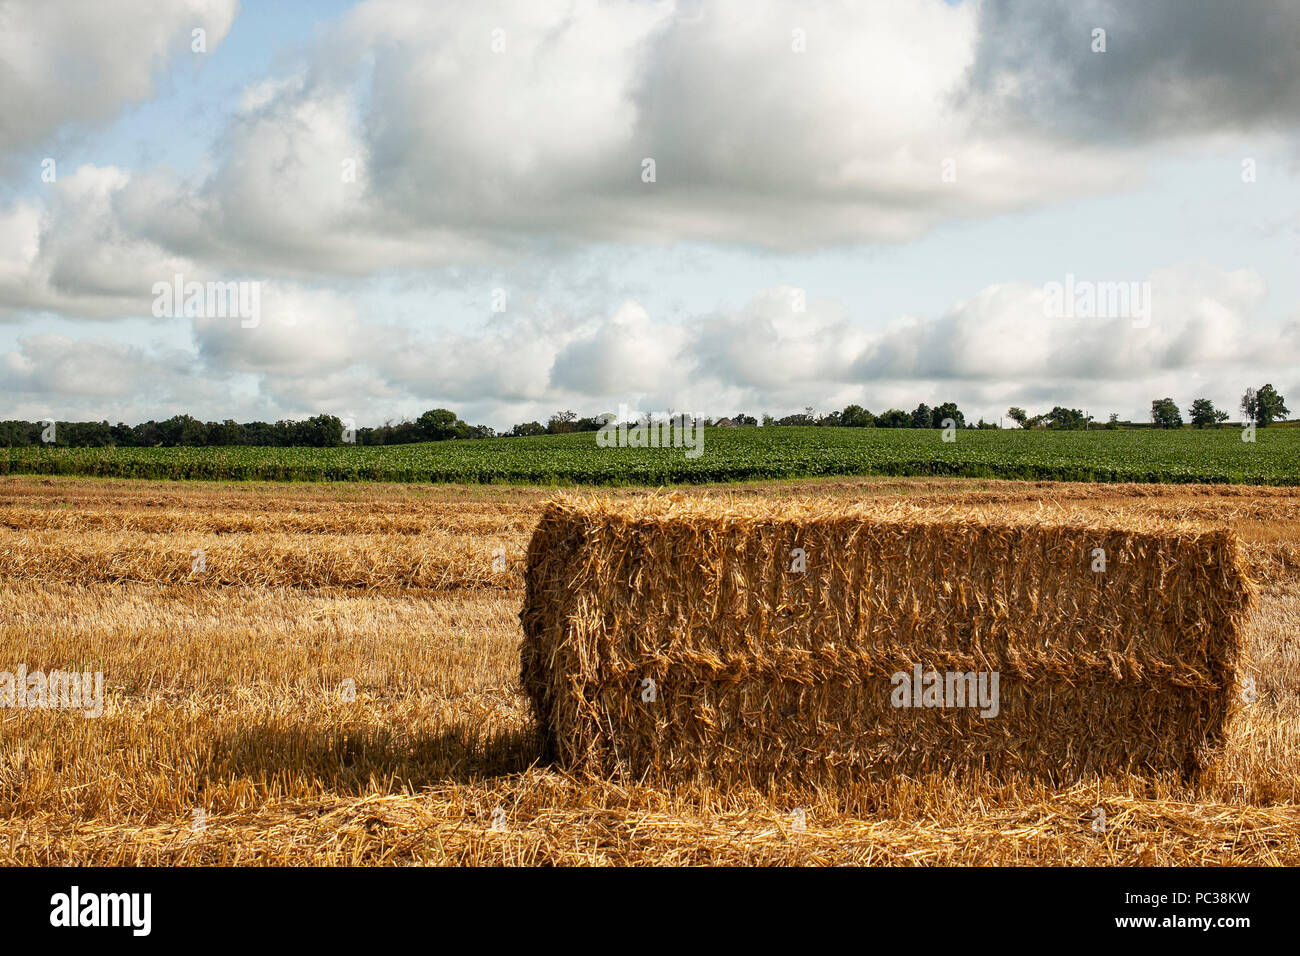 The side of a big square bale of wheat straw in a harvested field with soybeans in the distance and cumulous clouds. Stock Photo